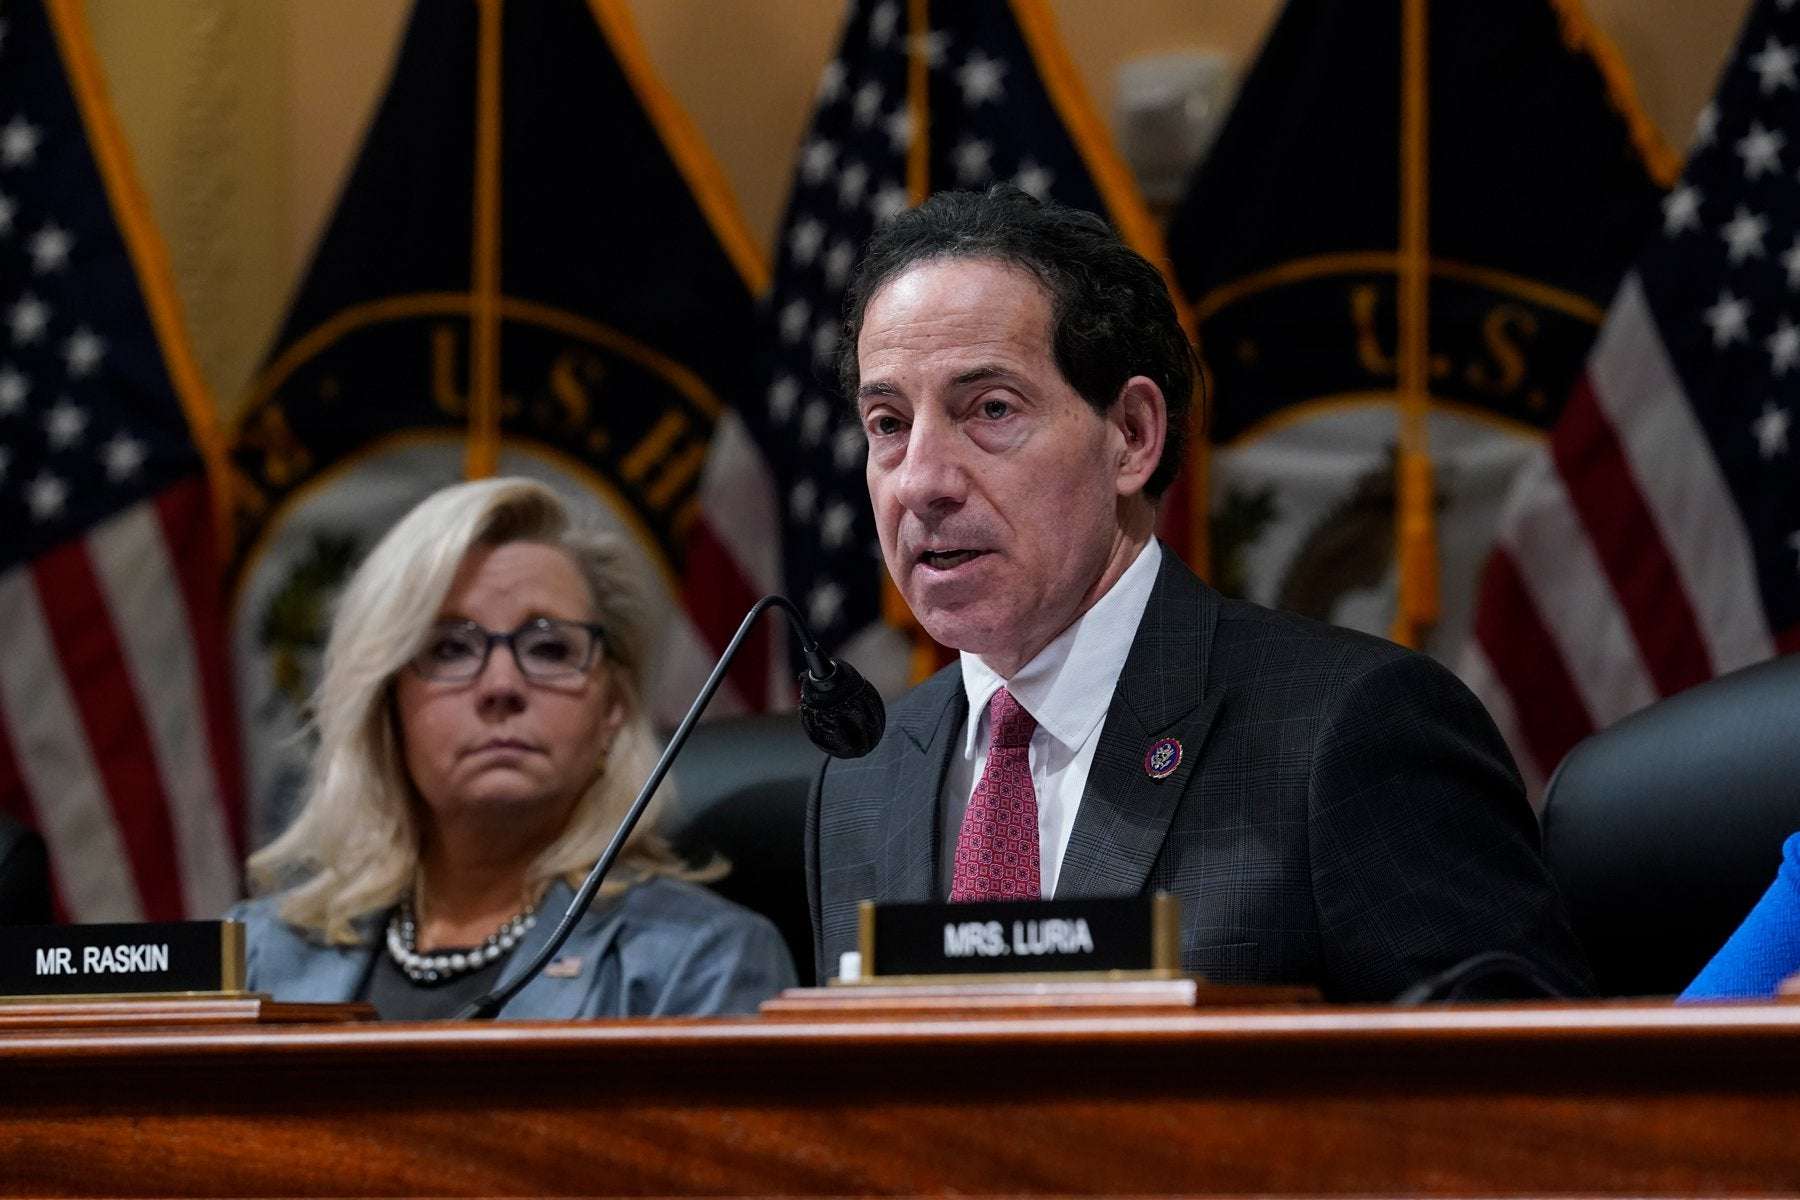 image for Jan. 6 Committee Findings Are So Explosive They Will ‘Blow the Roof Off the House,’ Rep. Jamie Raskin Says